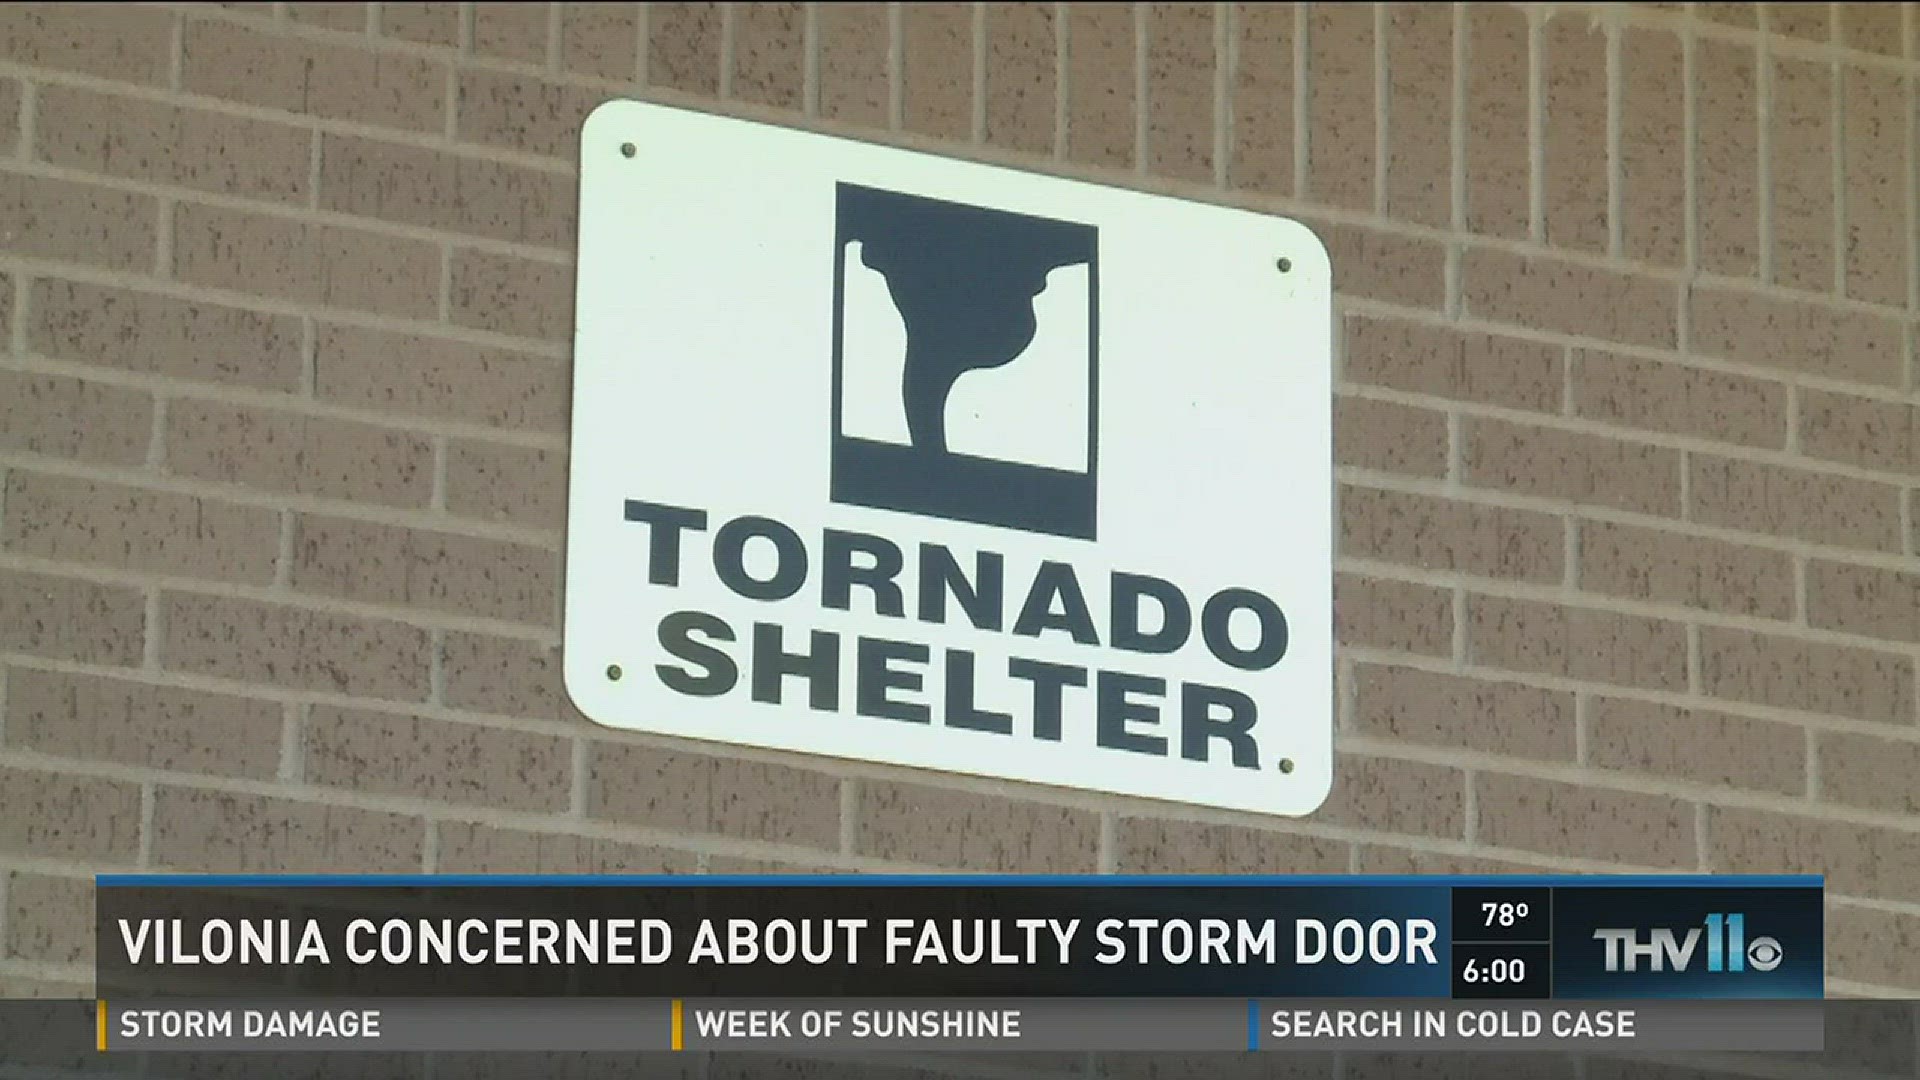 A storm shelter in Vilonia with a faulty door brought concerned viewers to THV11